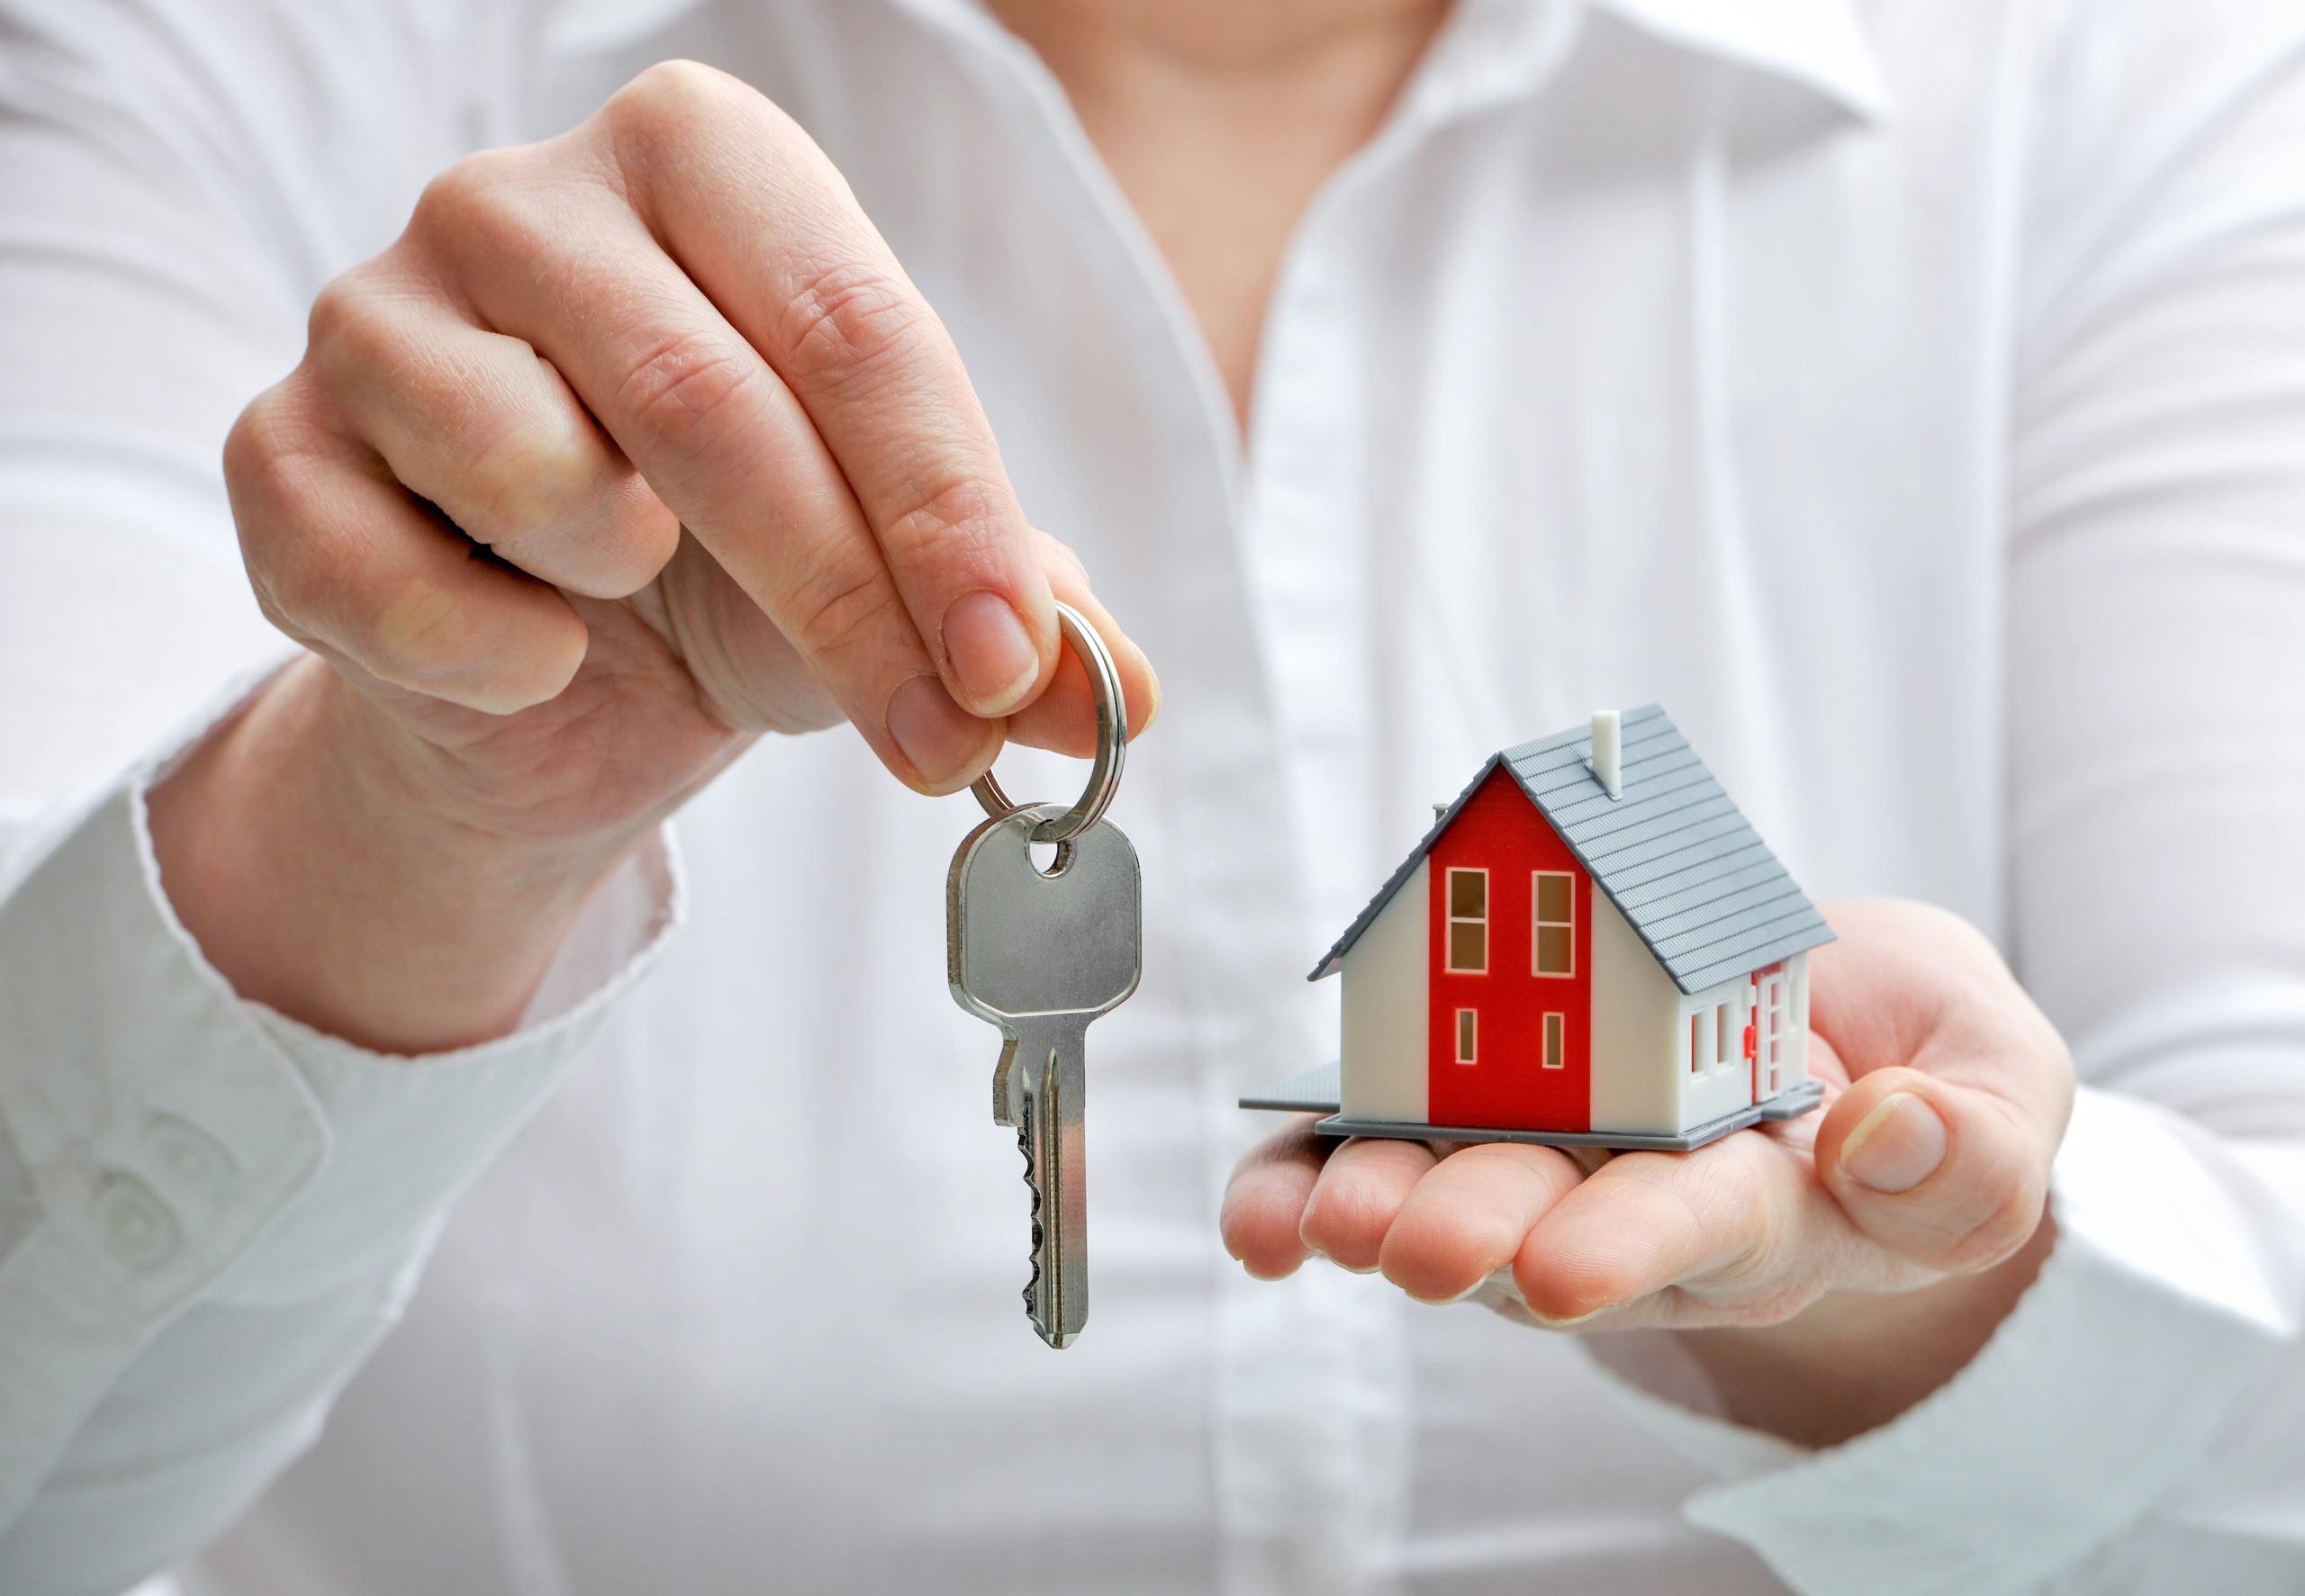 Woman holding keys and small red house